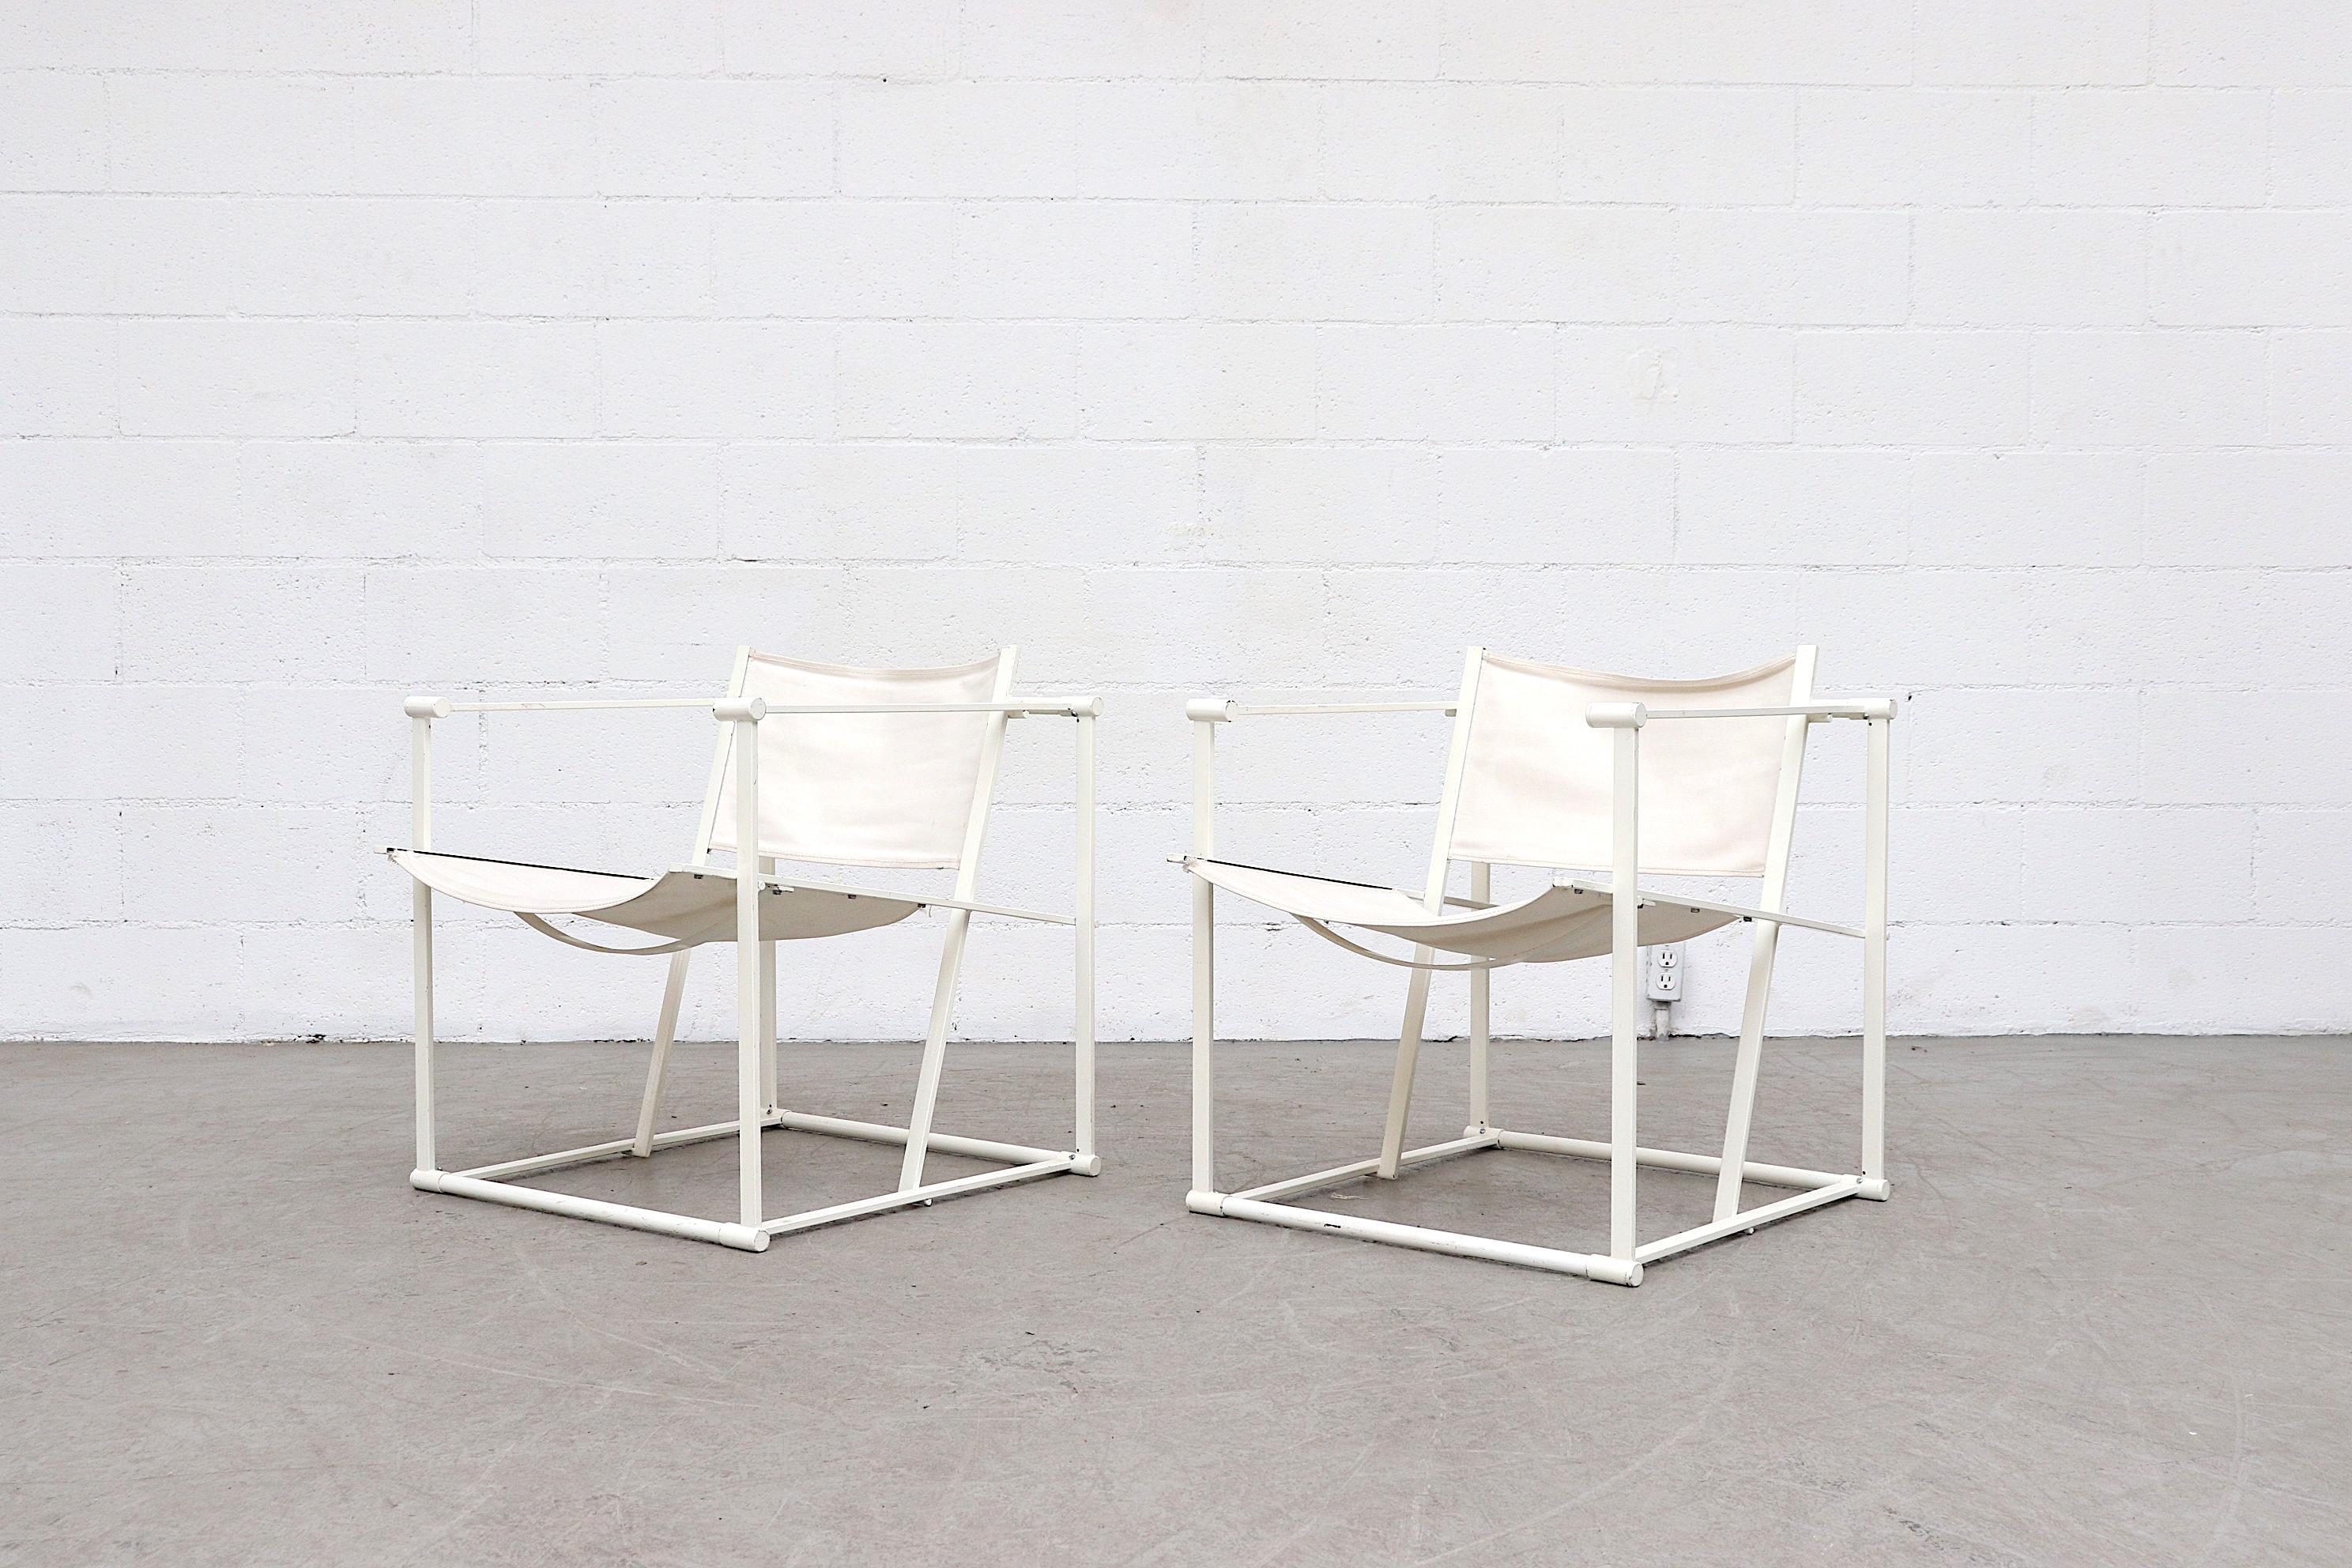 UMS Pastoe FM60, cube lounge chair, designed in 1980 by Radboud van Beekum. White enameled steel frame with original worn white-ish canvas seating. Frame is in original condition with visible wear to the enamel, visible fraying at seat and back